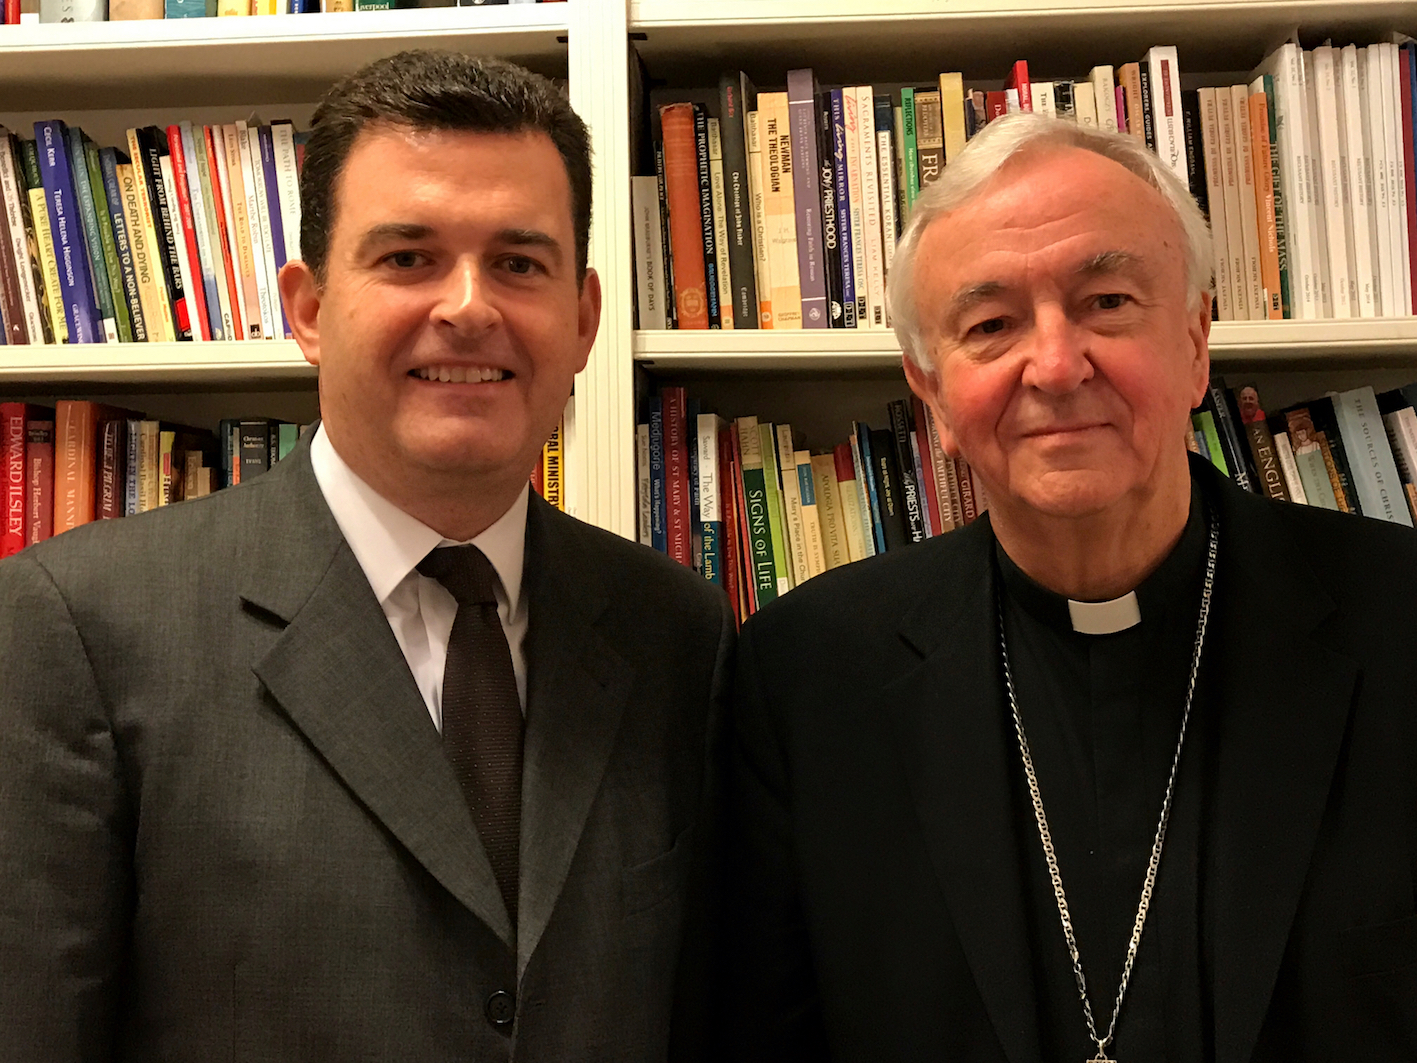 Delegate meets with Cardinal Archbishop of Westminster and Delegation Prior